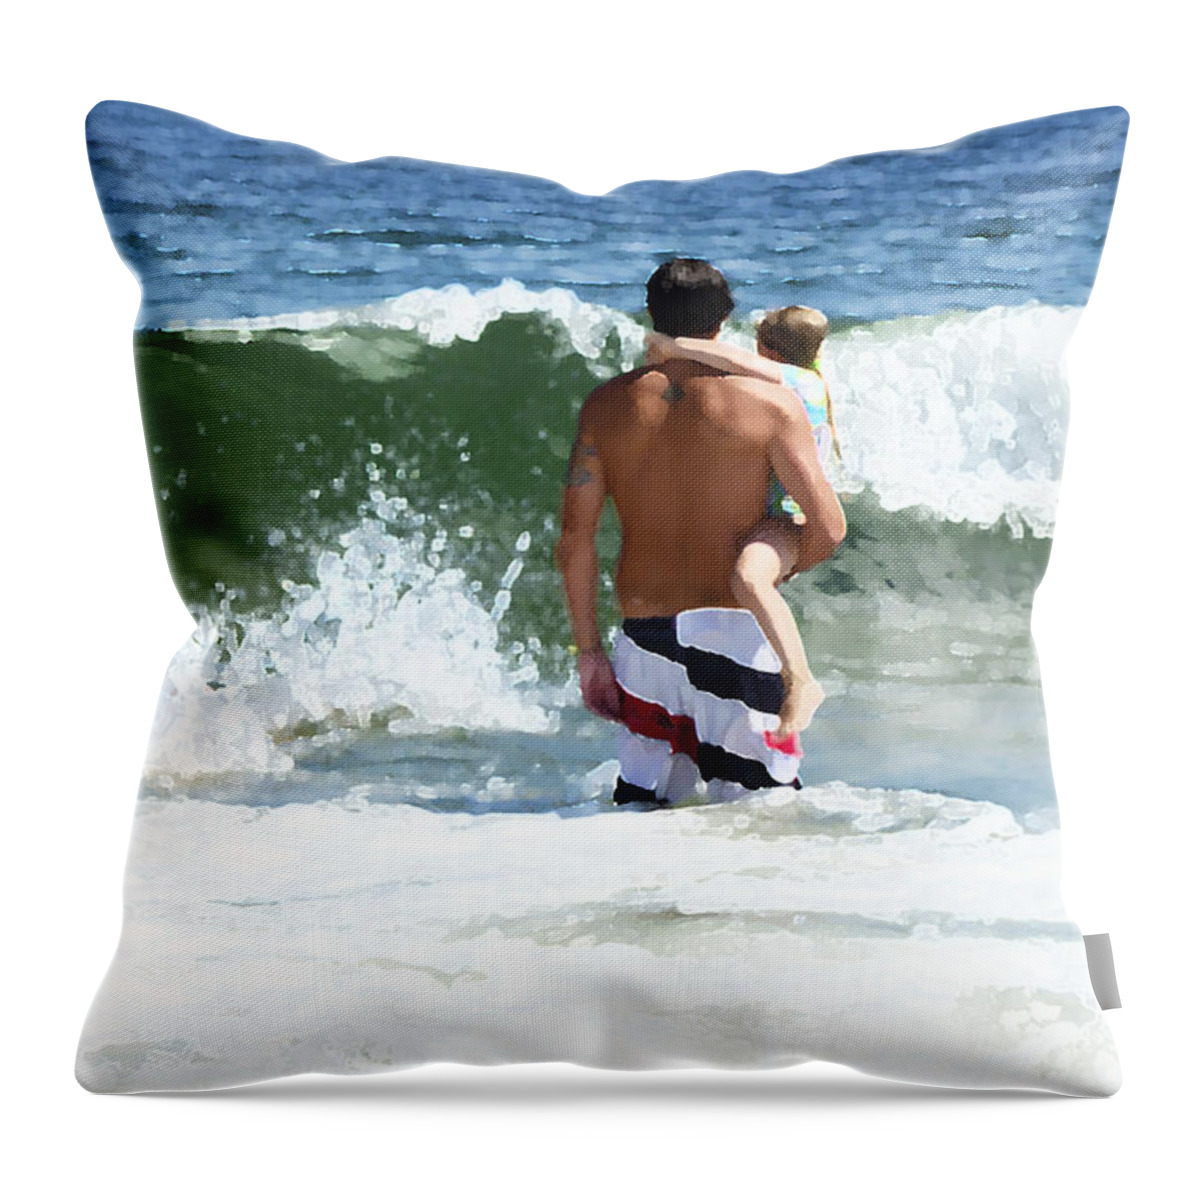 Ocean Throw Pillow featuring the photograph Holding On by Maureen E Ritter